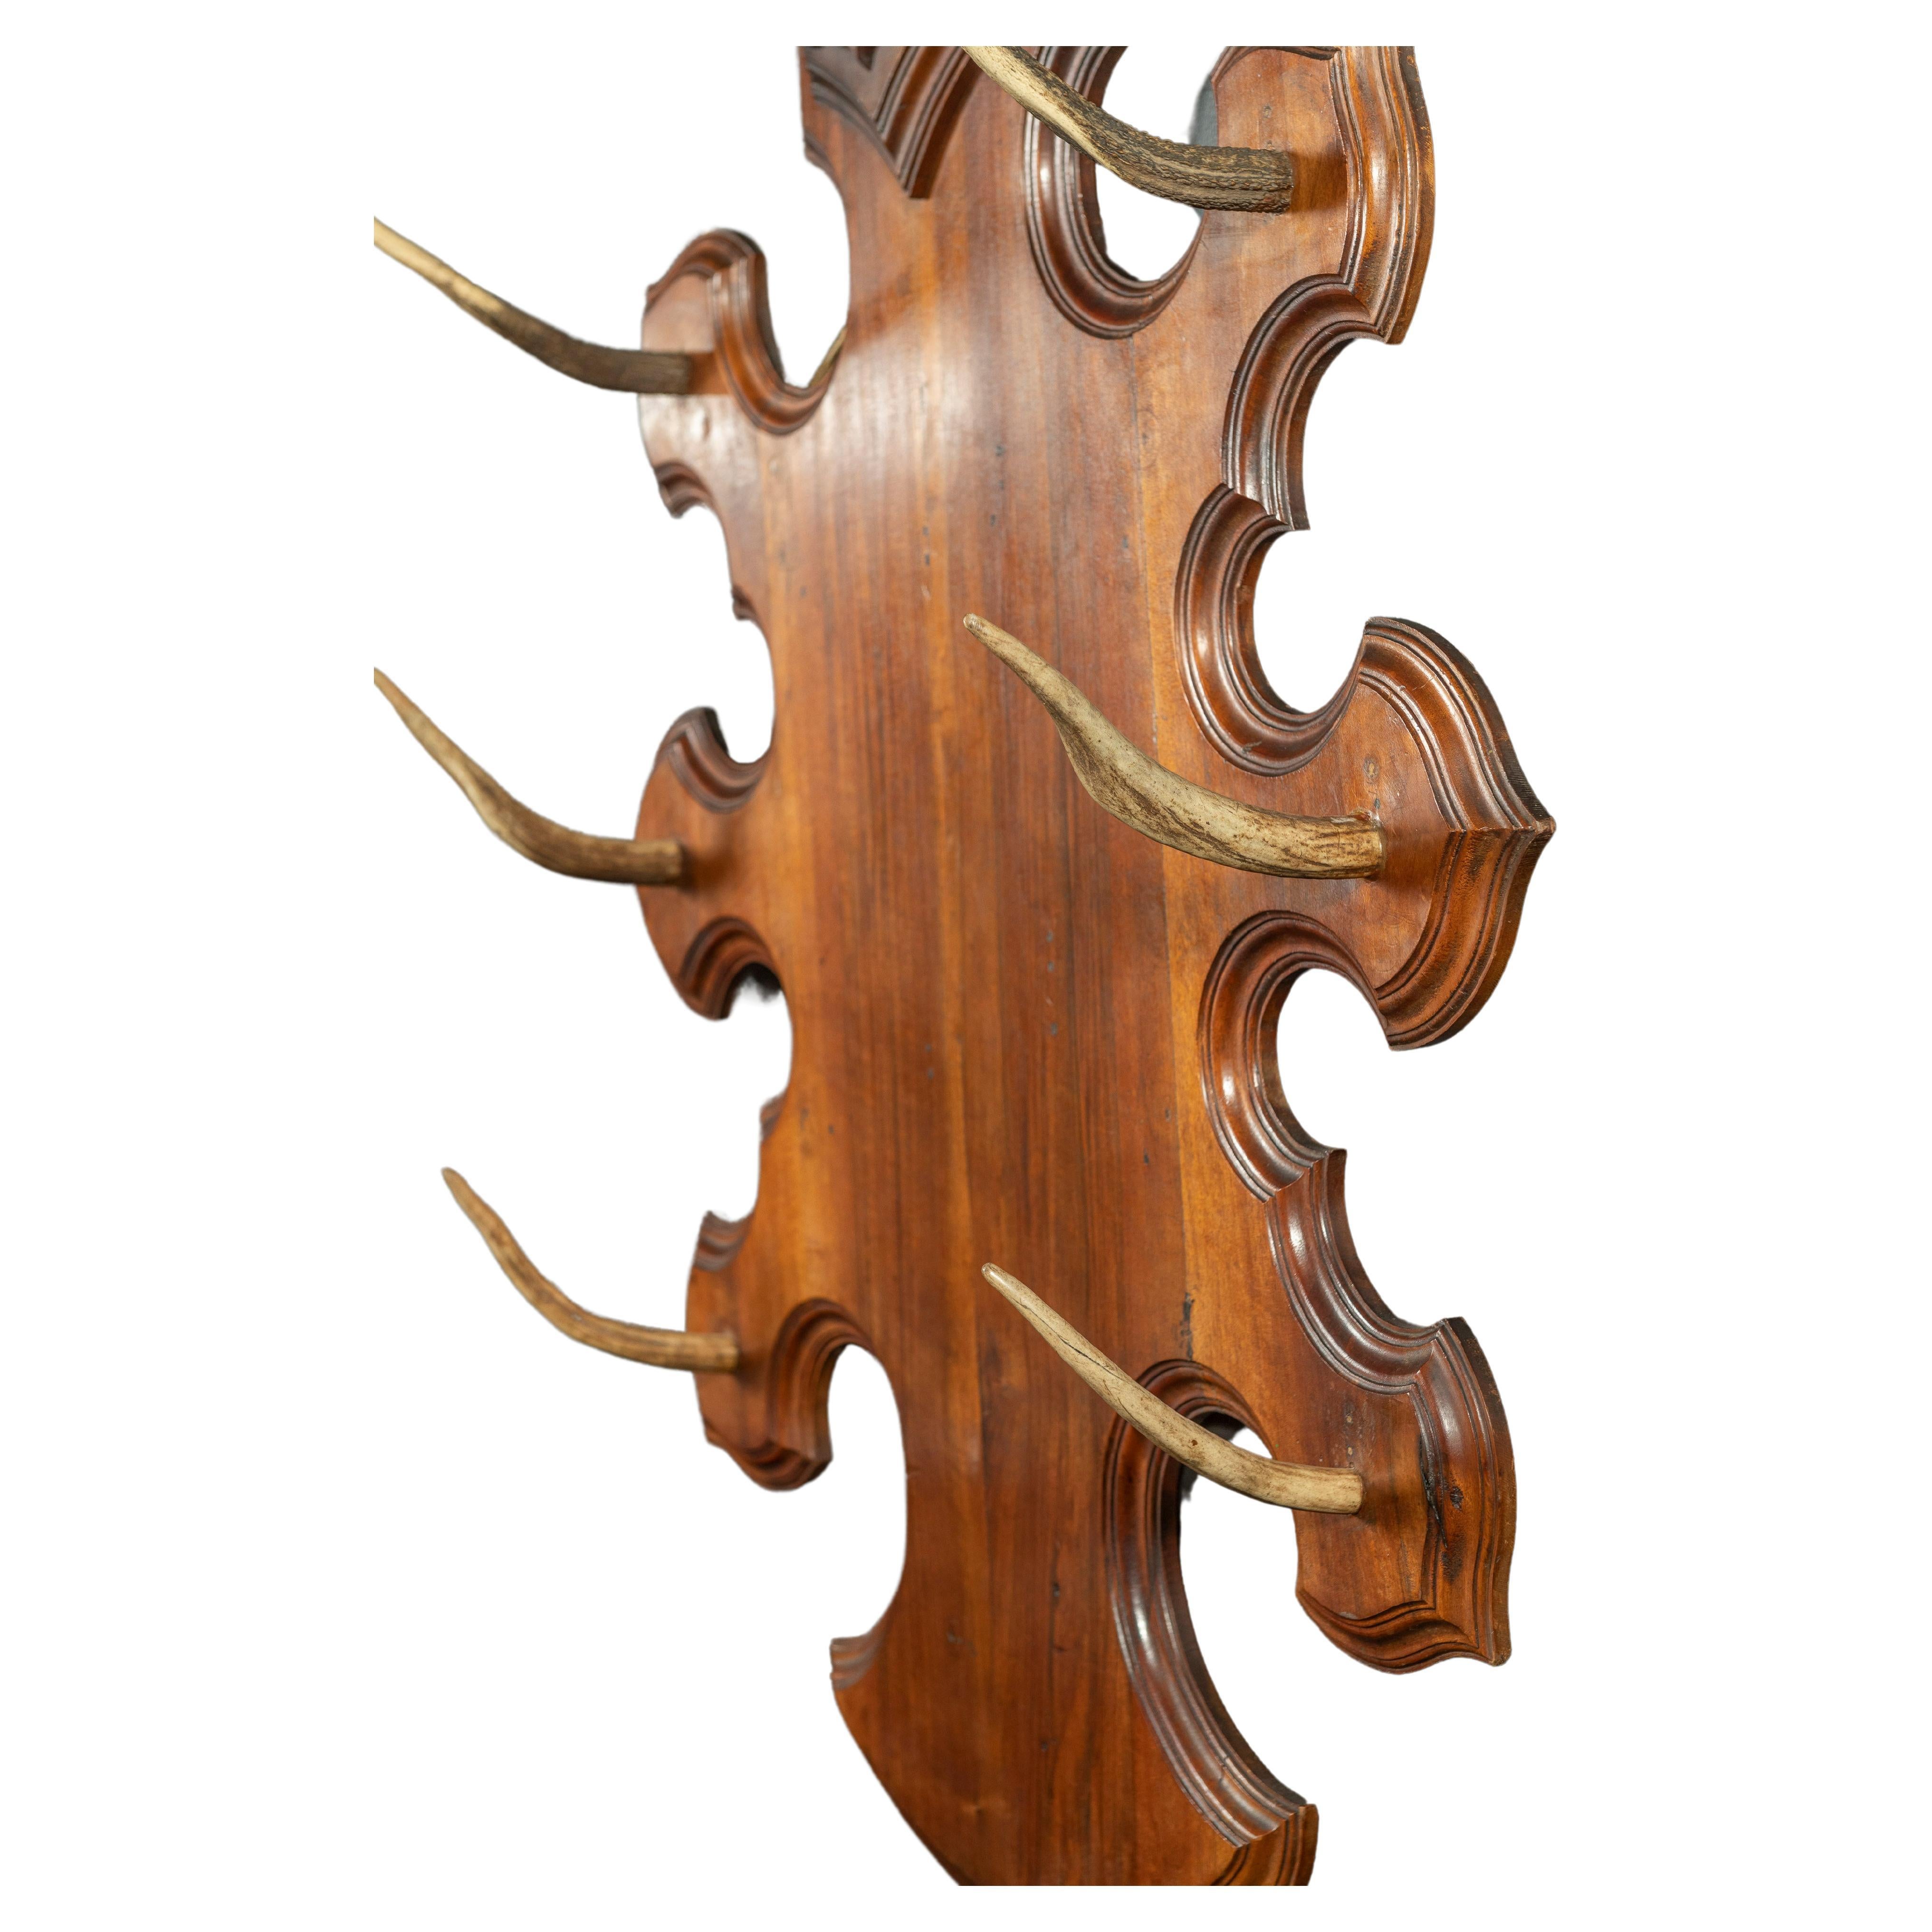 Beautiful vintage carved wooden shield has six antlers and is perfect for an entrance or mud room, gathering hats, coats, jackets and scarves. The shape of the shield appears to have been influenced by furniture of the Black Forest.